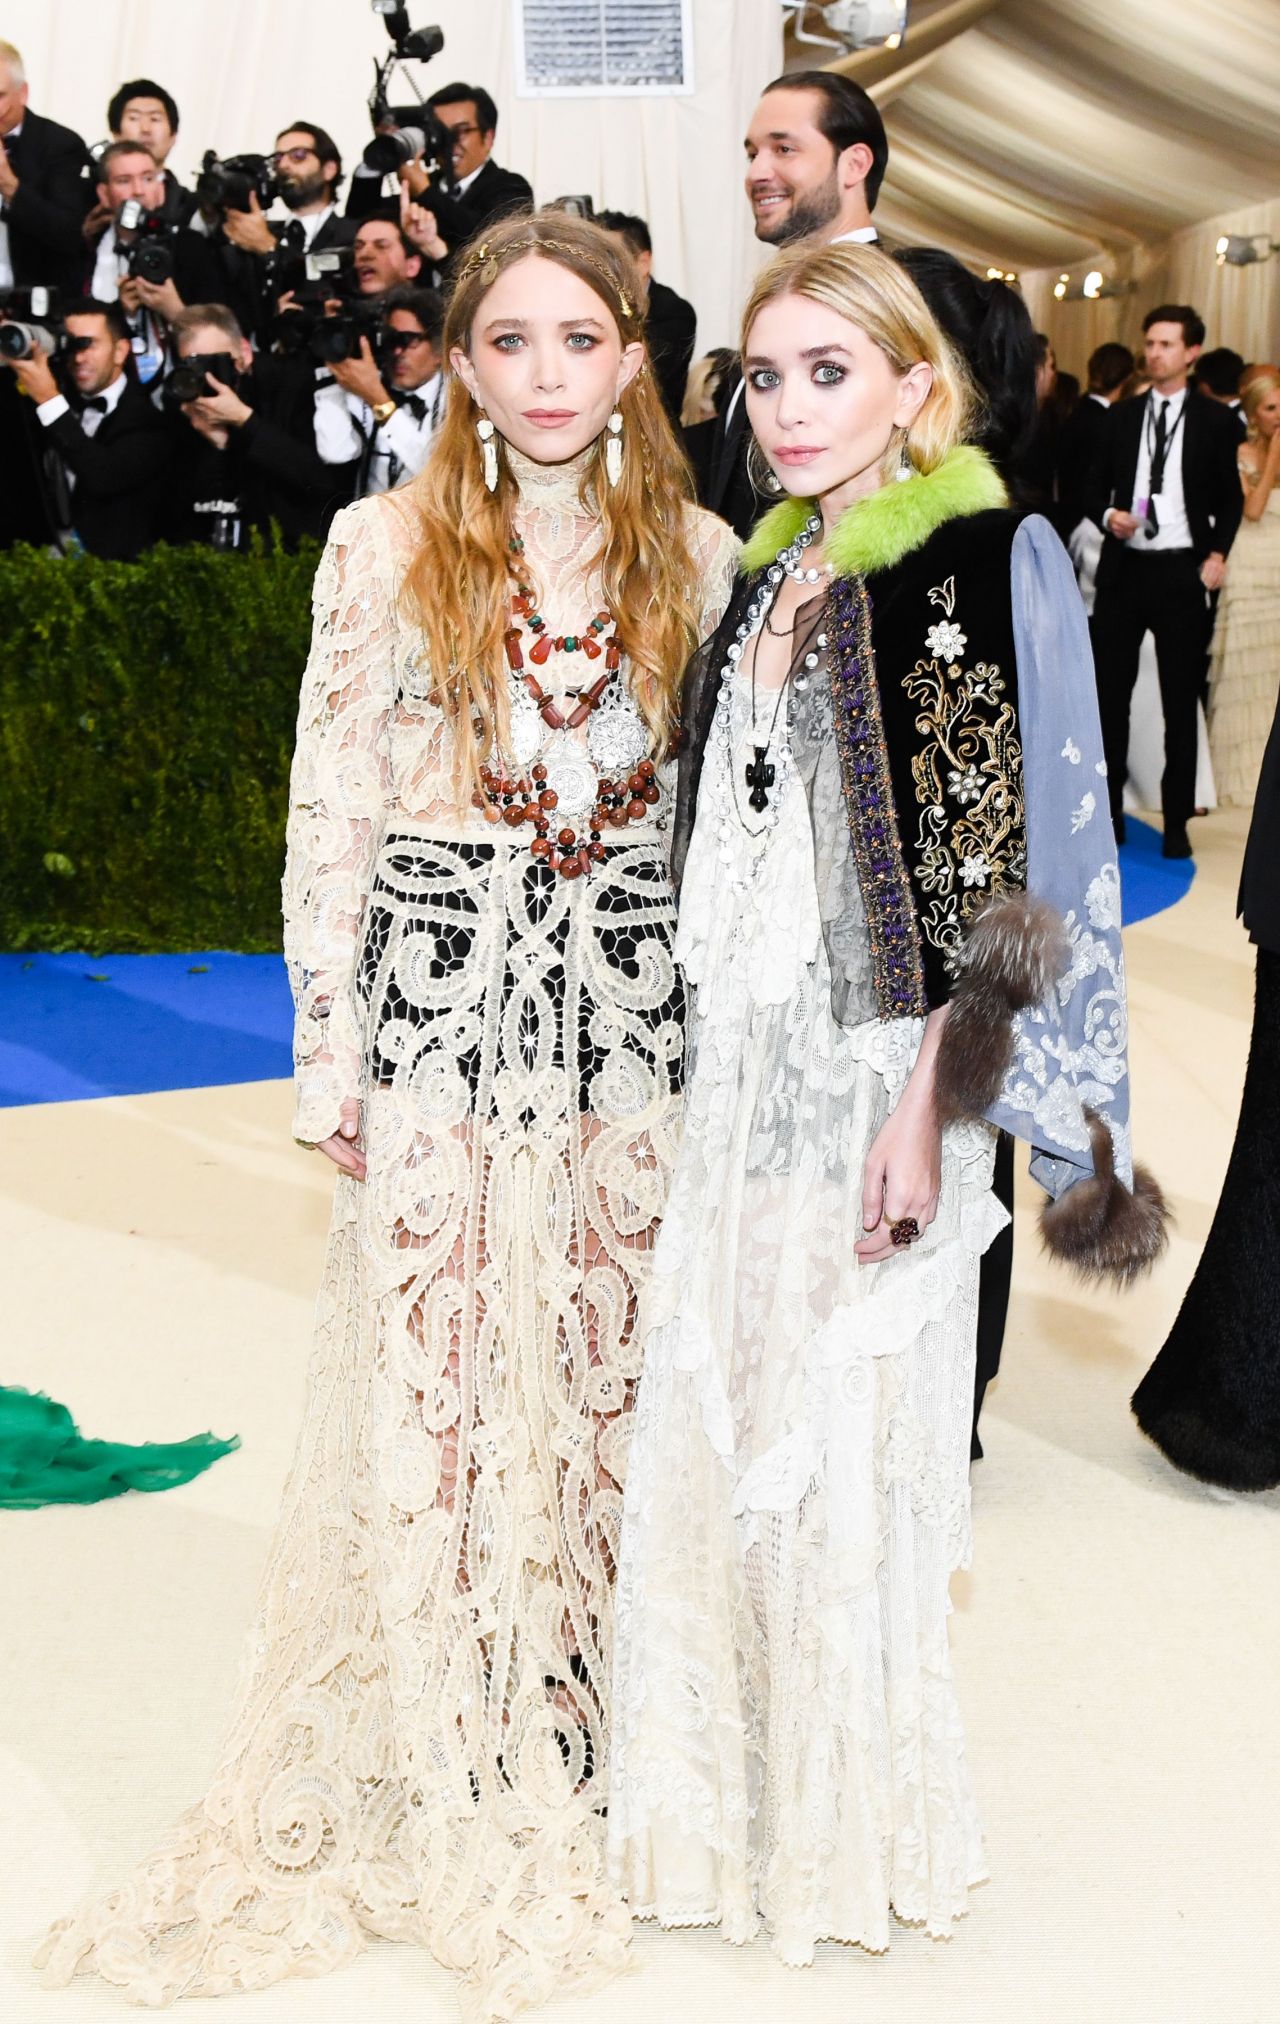 Mary-Kate and Ashley Olsen at MET Gala in New York 05/01/2017 • CelebMafia